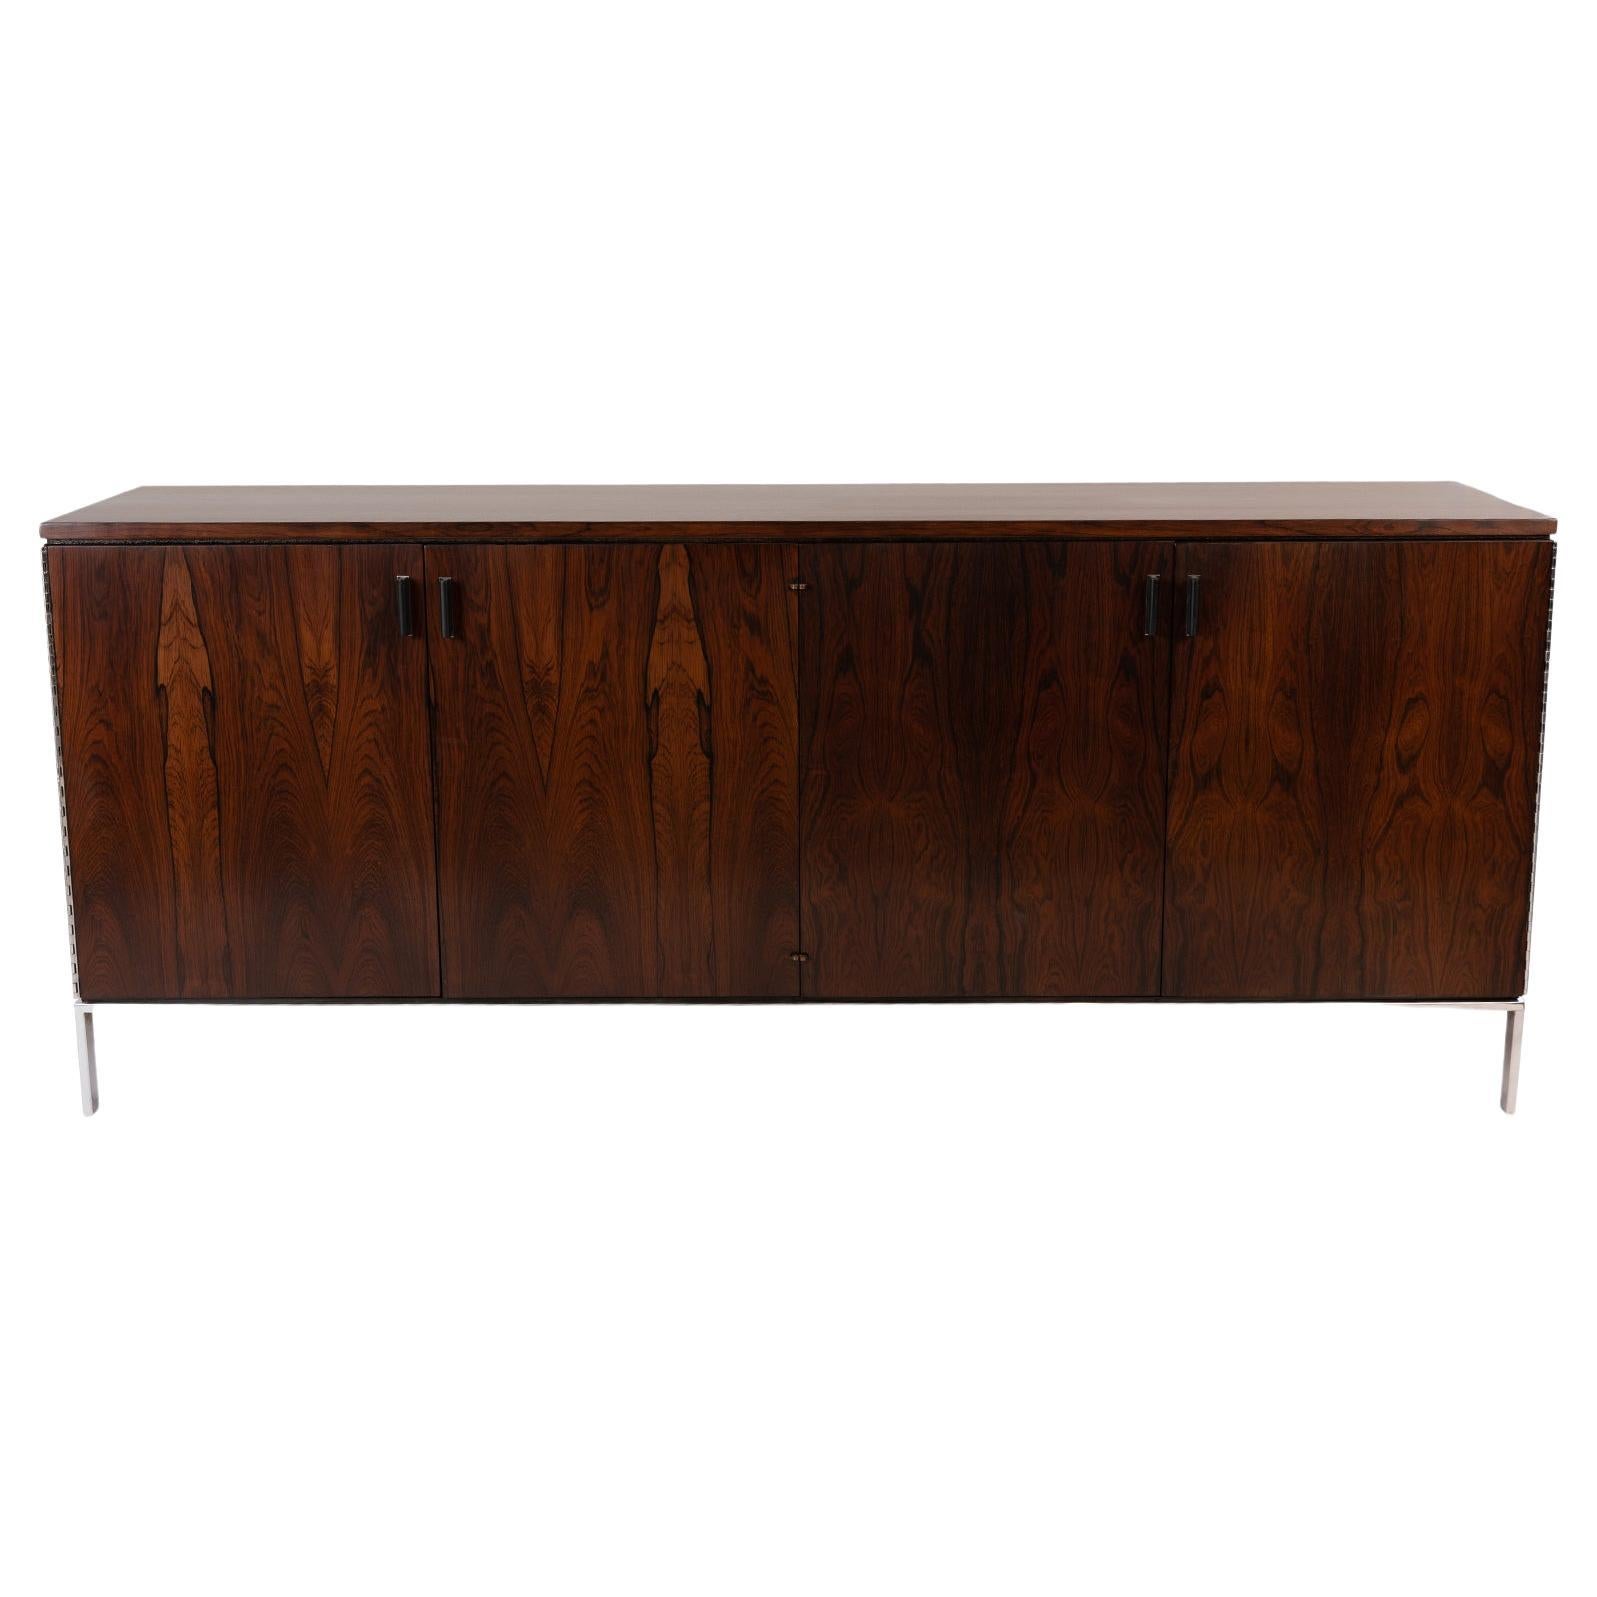 Founders Mid Century Walnut and Cane Sideboard Credenza at 1stDibs